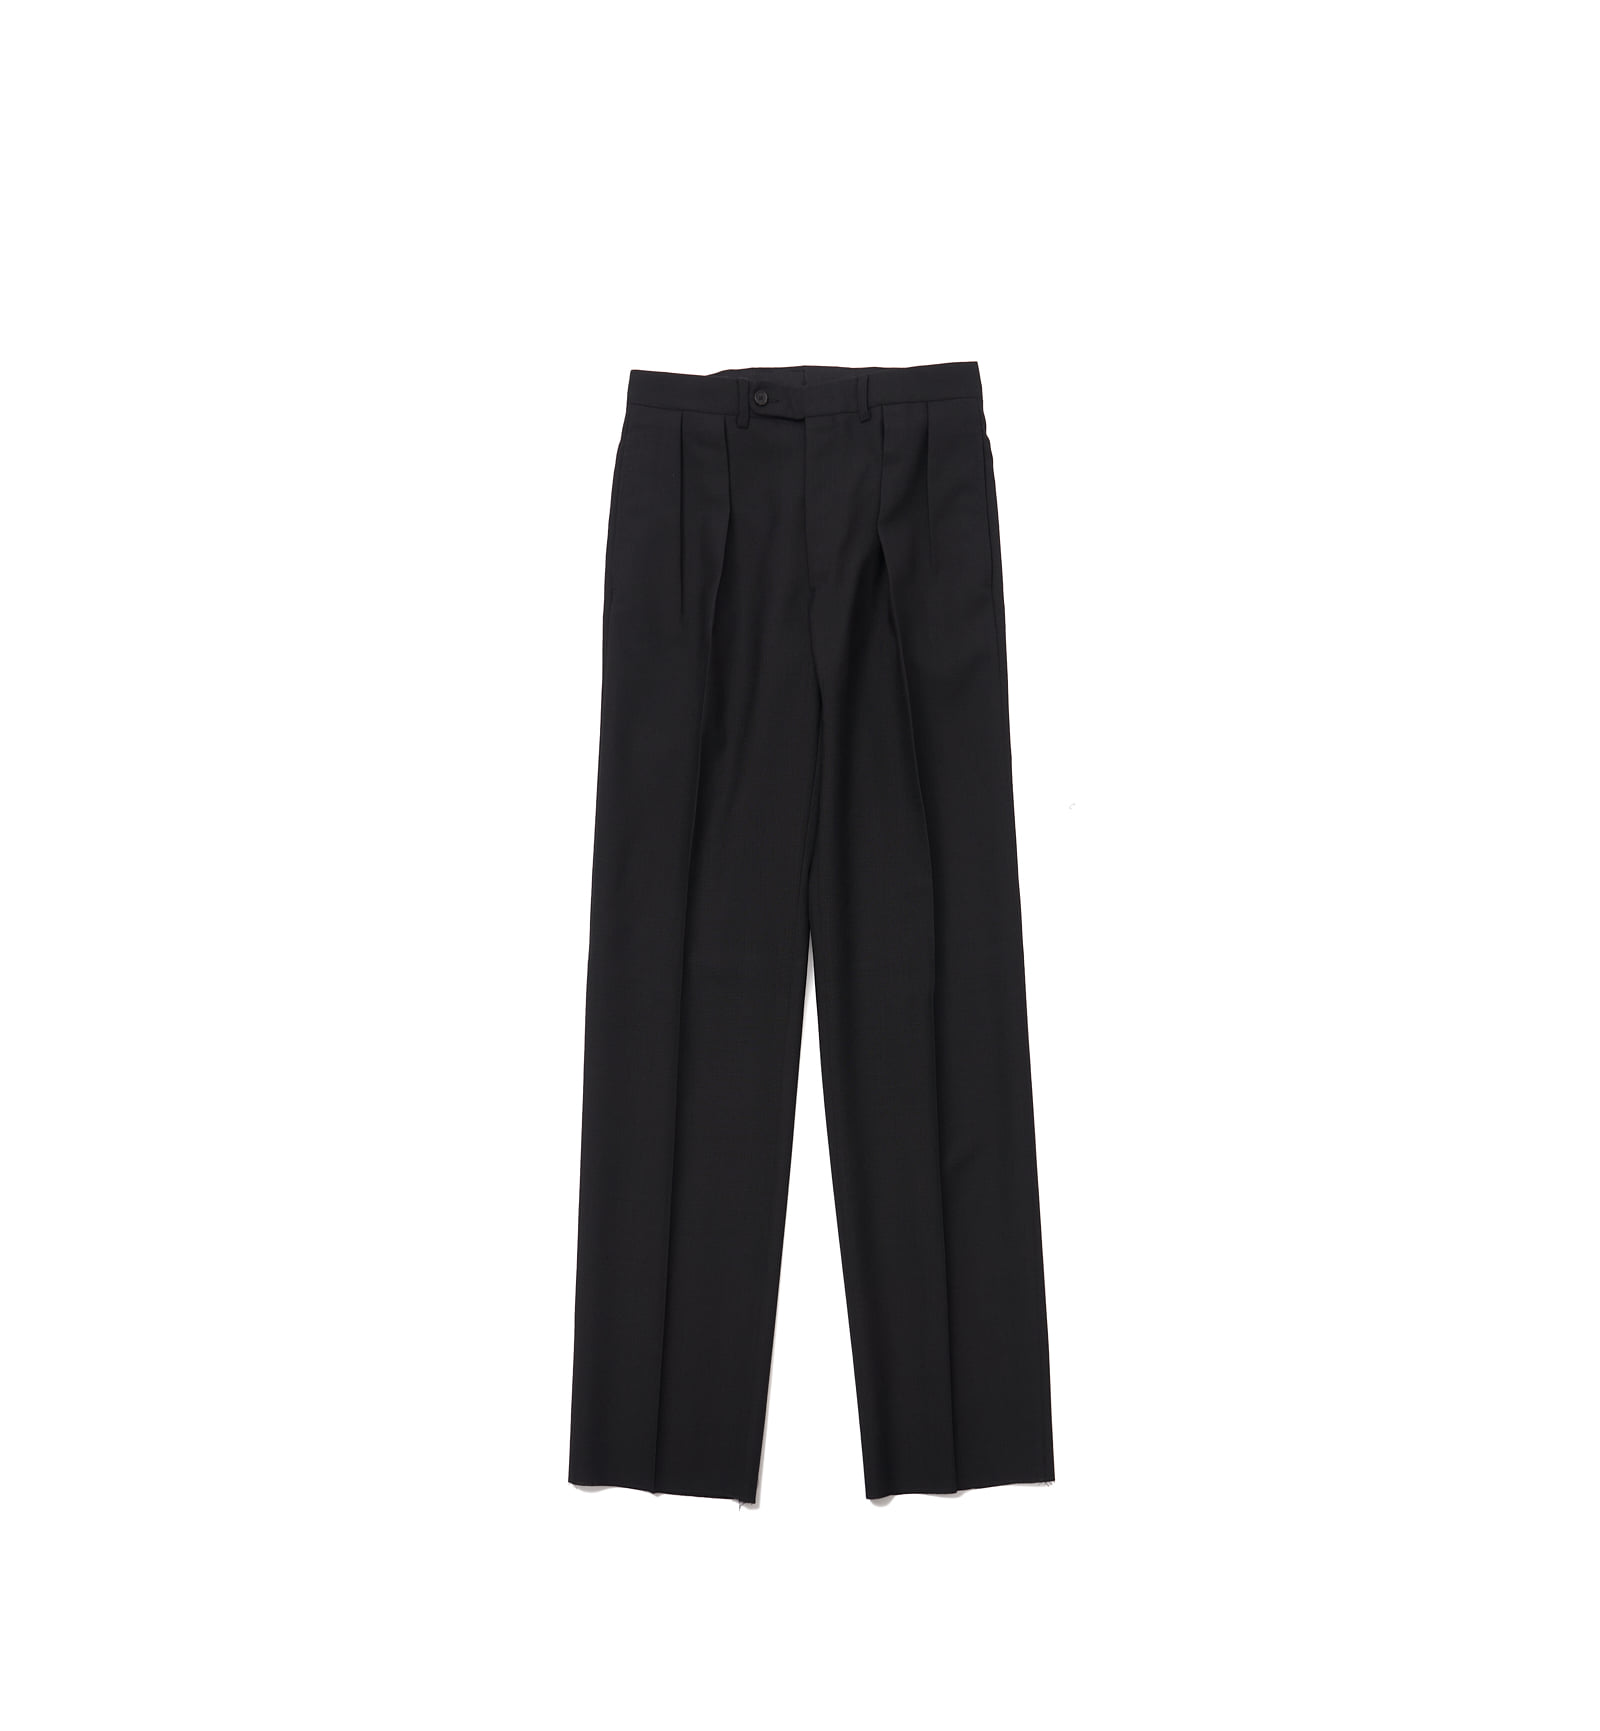 Straight High Waisted Trousers Black English Worsted Wool